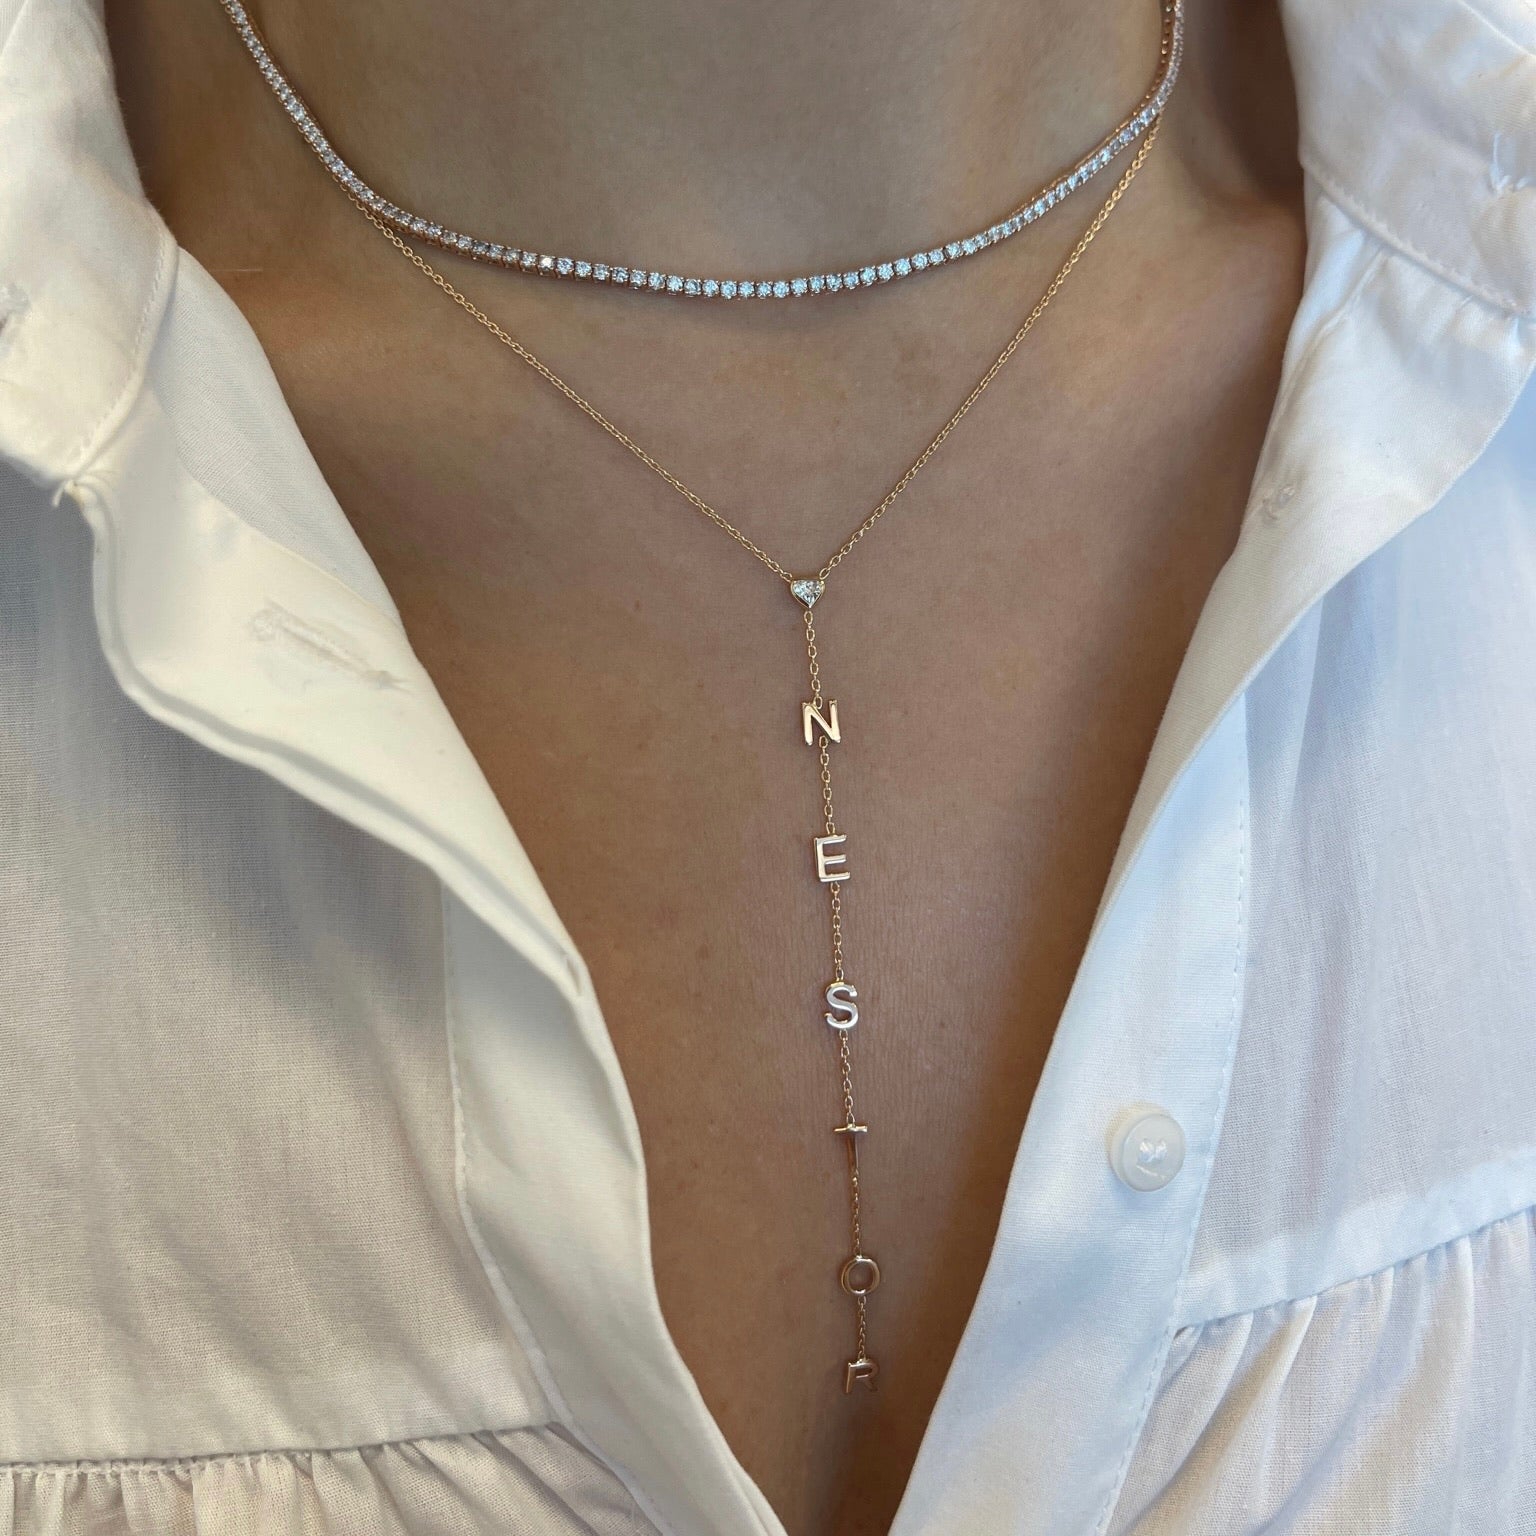 Drop Down Name Necklace (Add Diamonds/Charms)